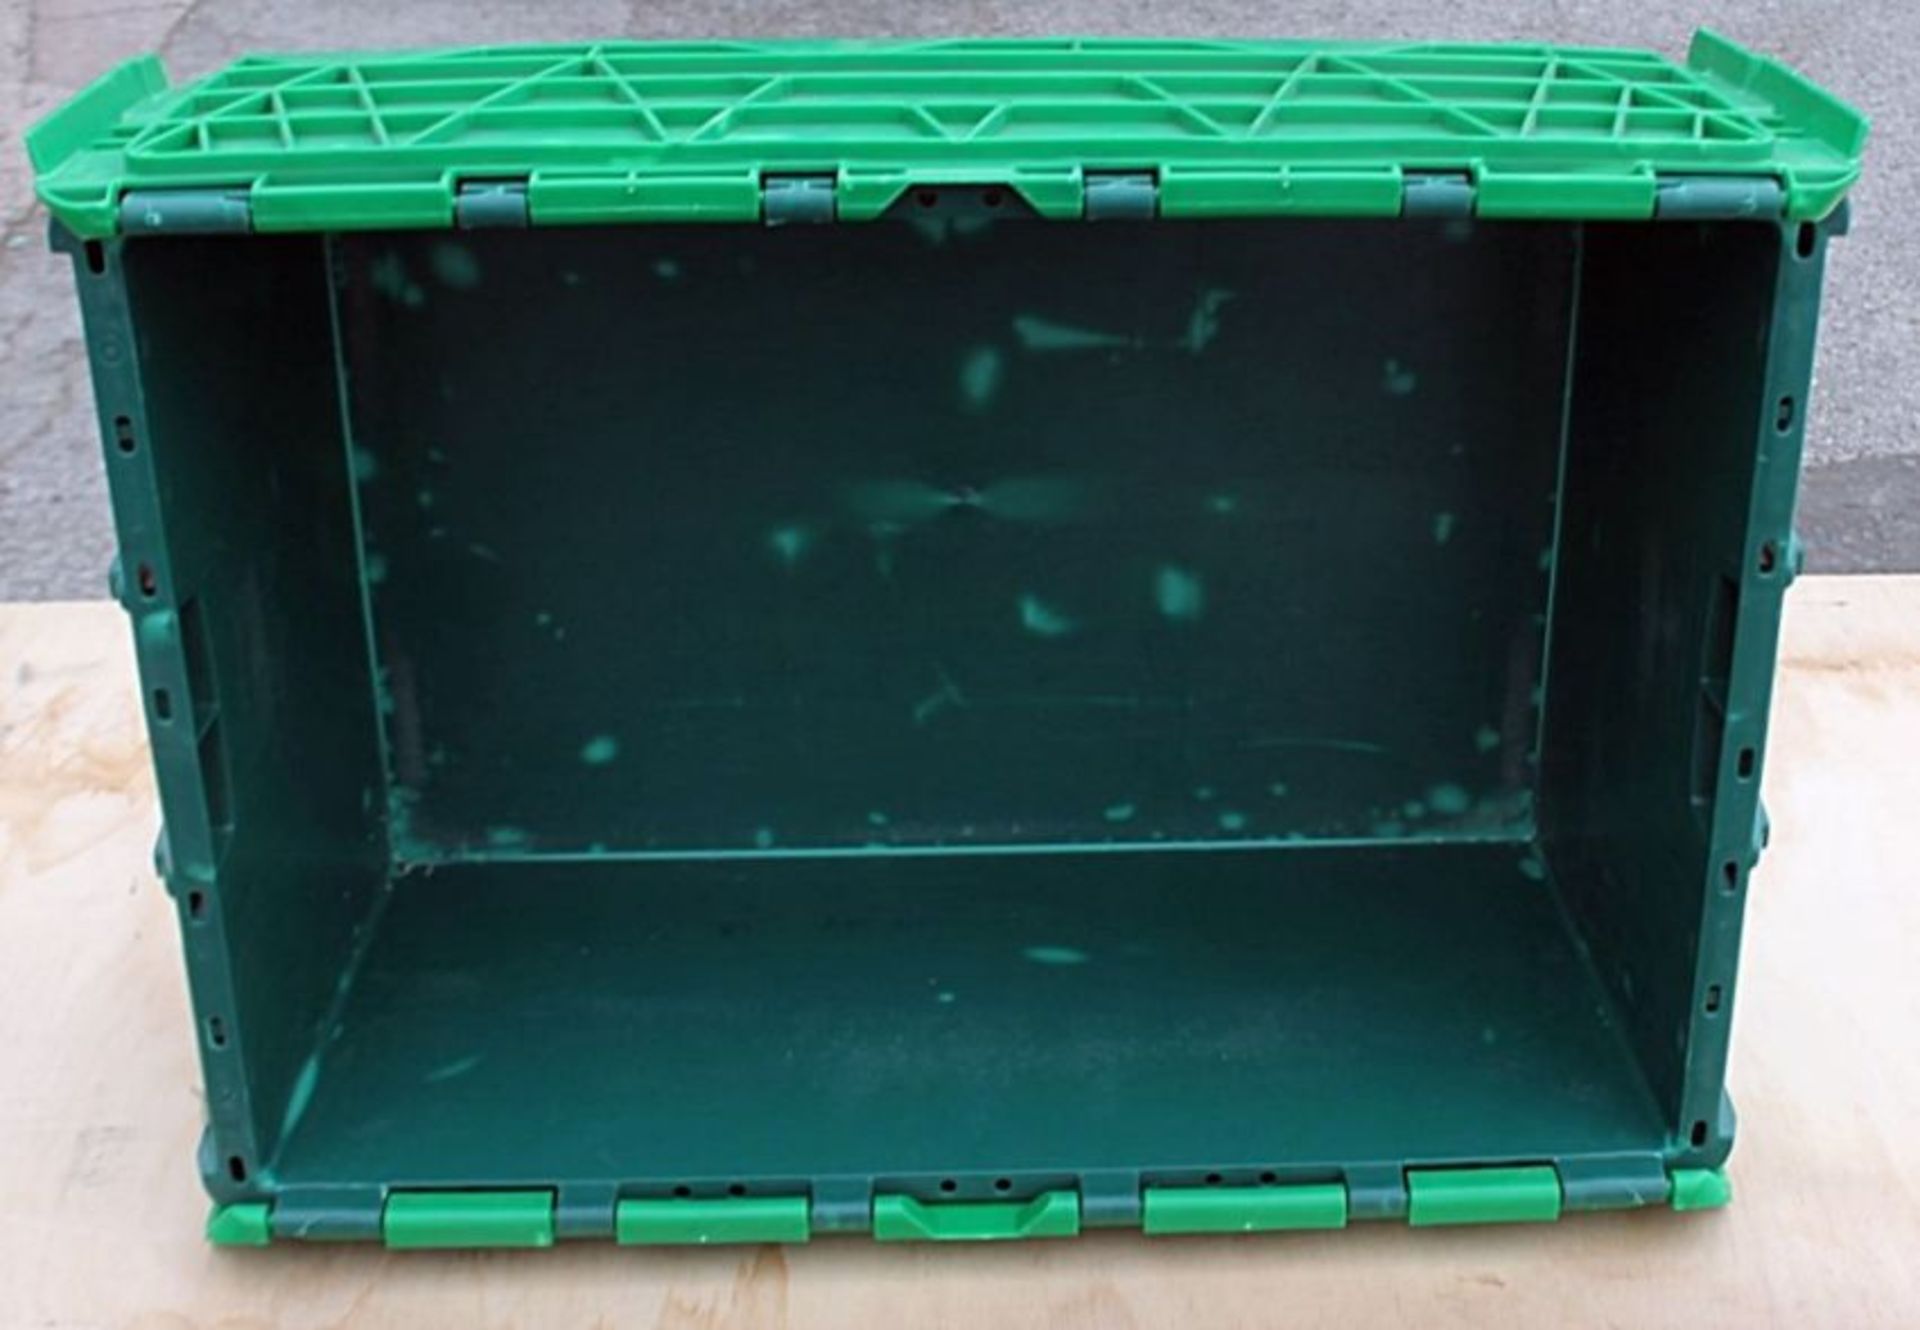 20 x Robust Low Profile Green Plastic Secure Storage Boxes With Attached Hinged Lids - Dimensions: - Image 6 of 7